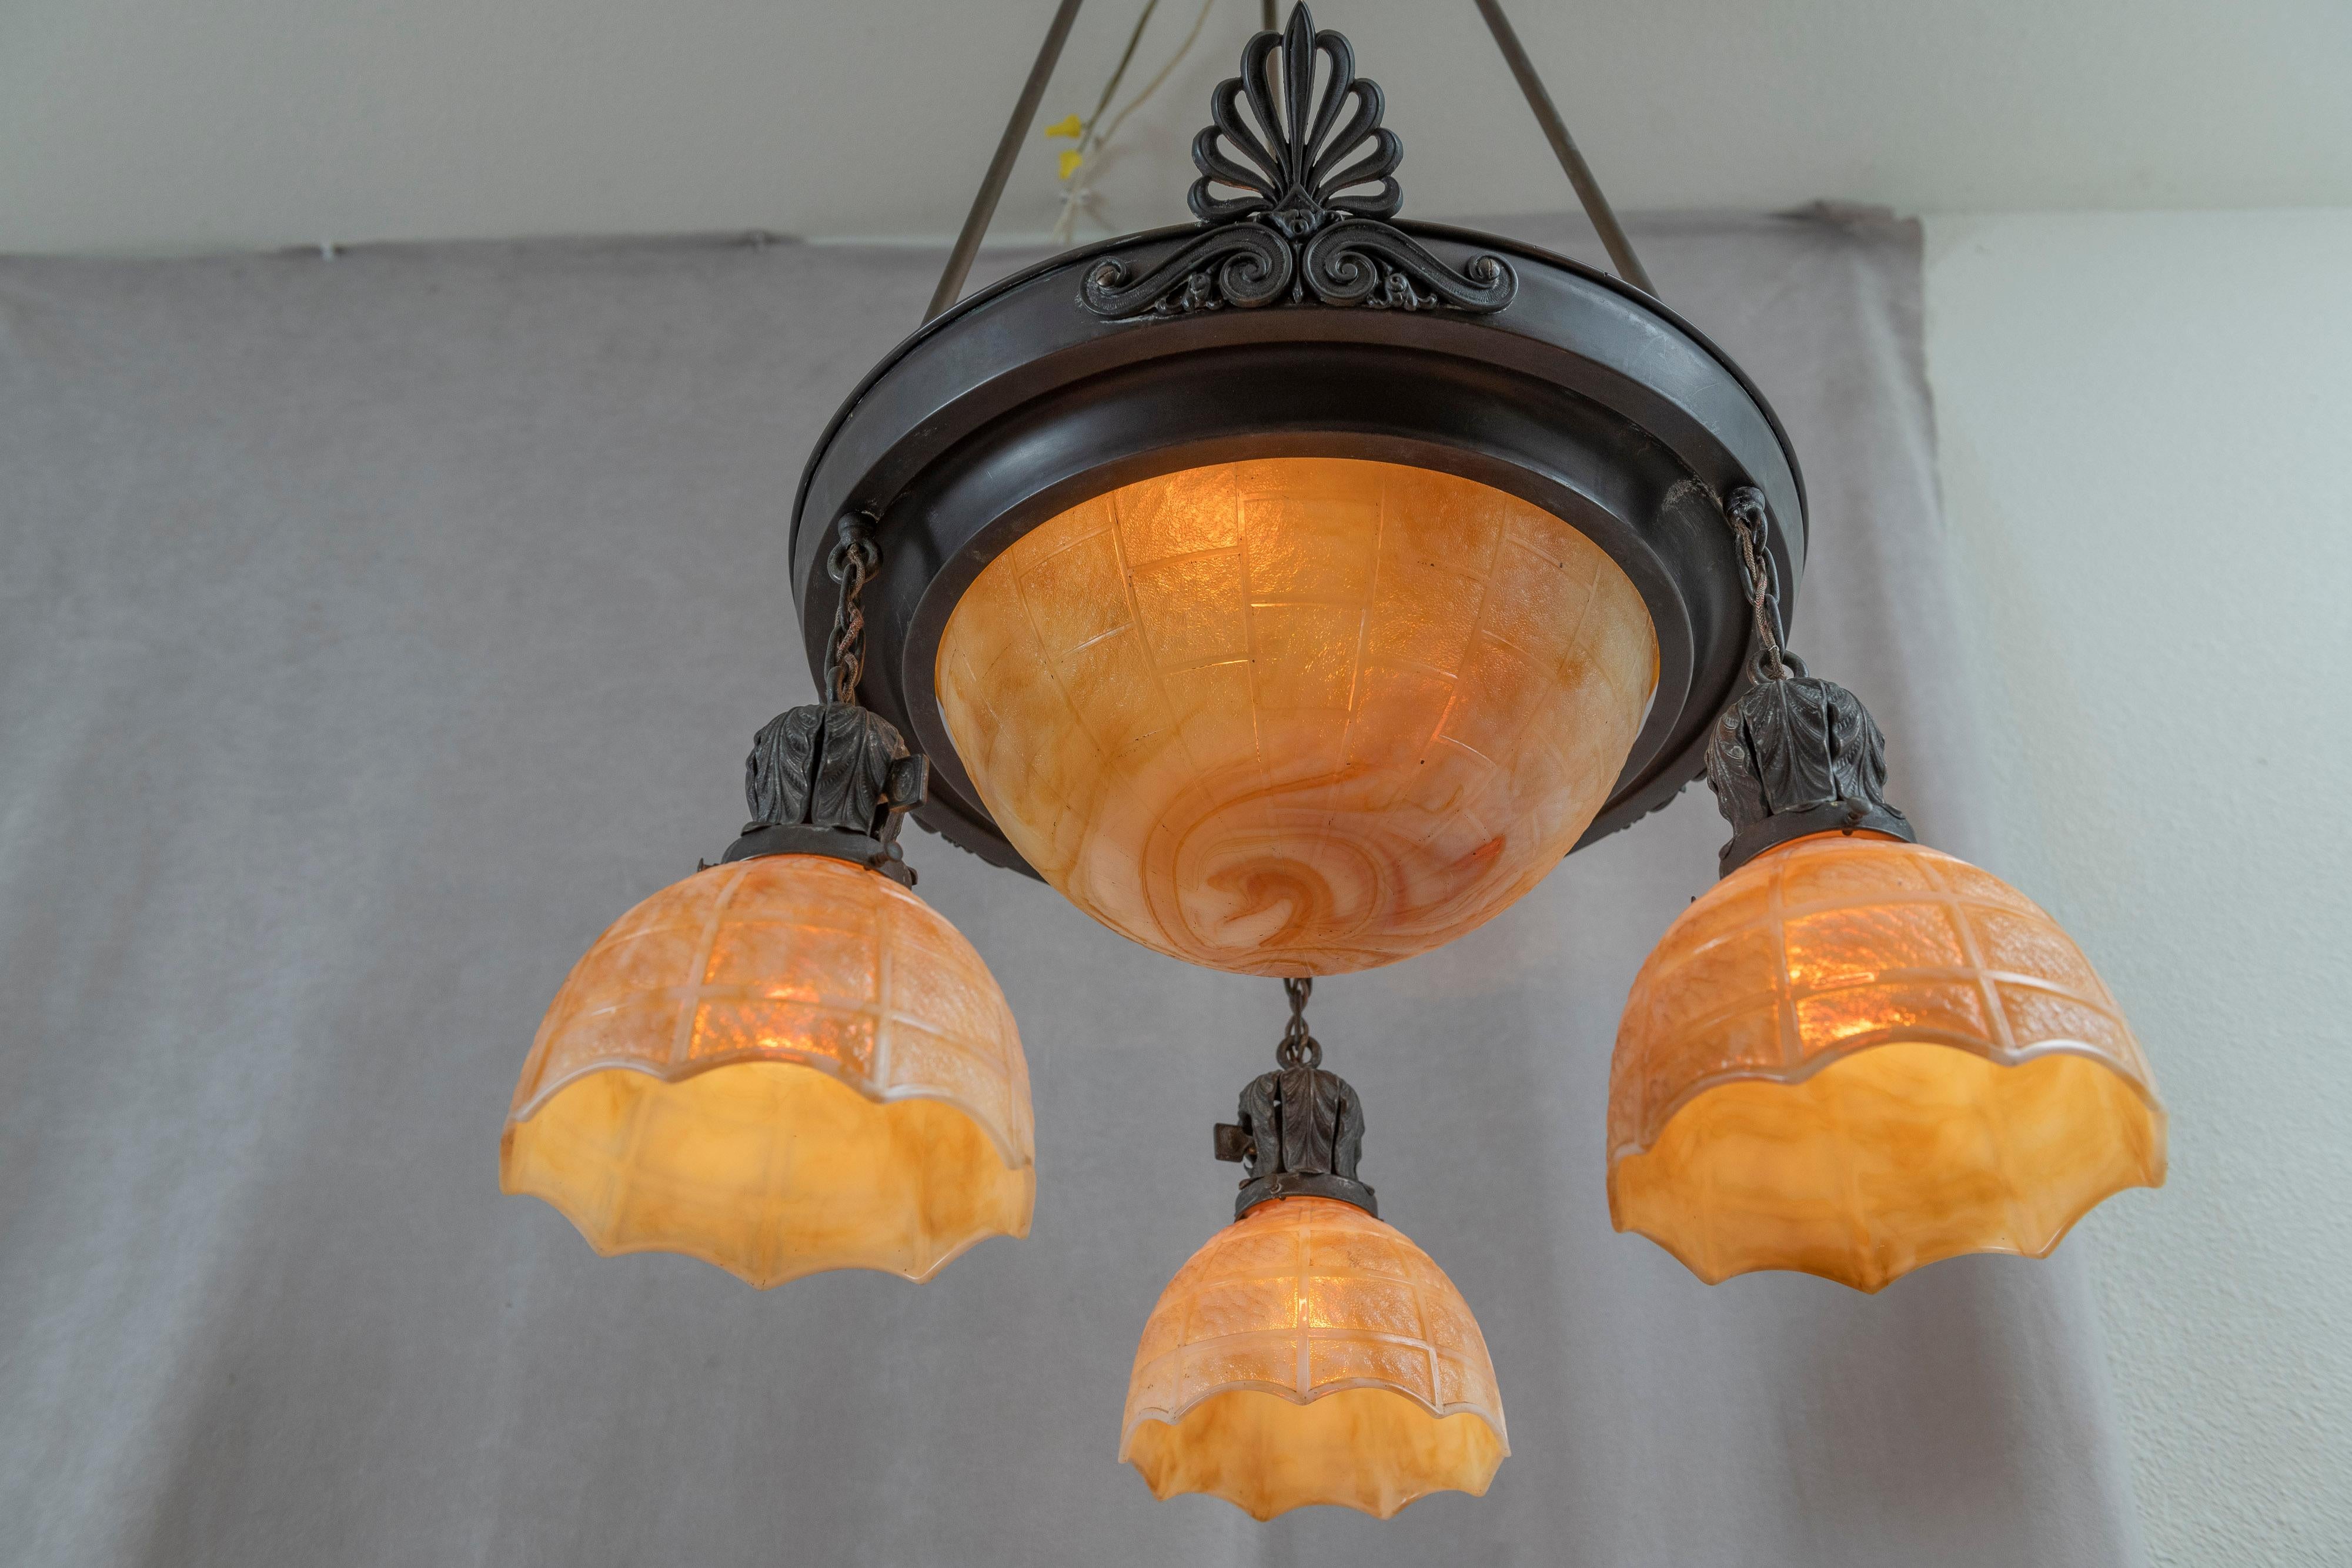 This handsome chandelier is simple and elegant. The richly patinated metalwork supports and inverted dome which is surrounded by 3 matching glass shades. We know the glass to be made by Kokomo Glass. The glass is thick and opaque so lightbulbs are